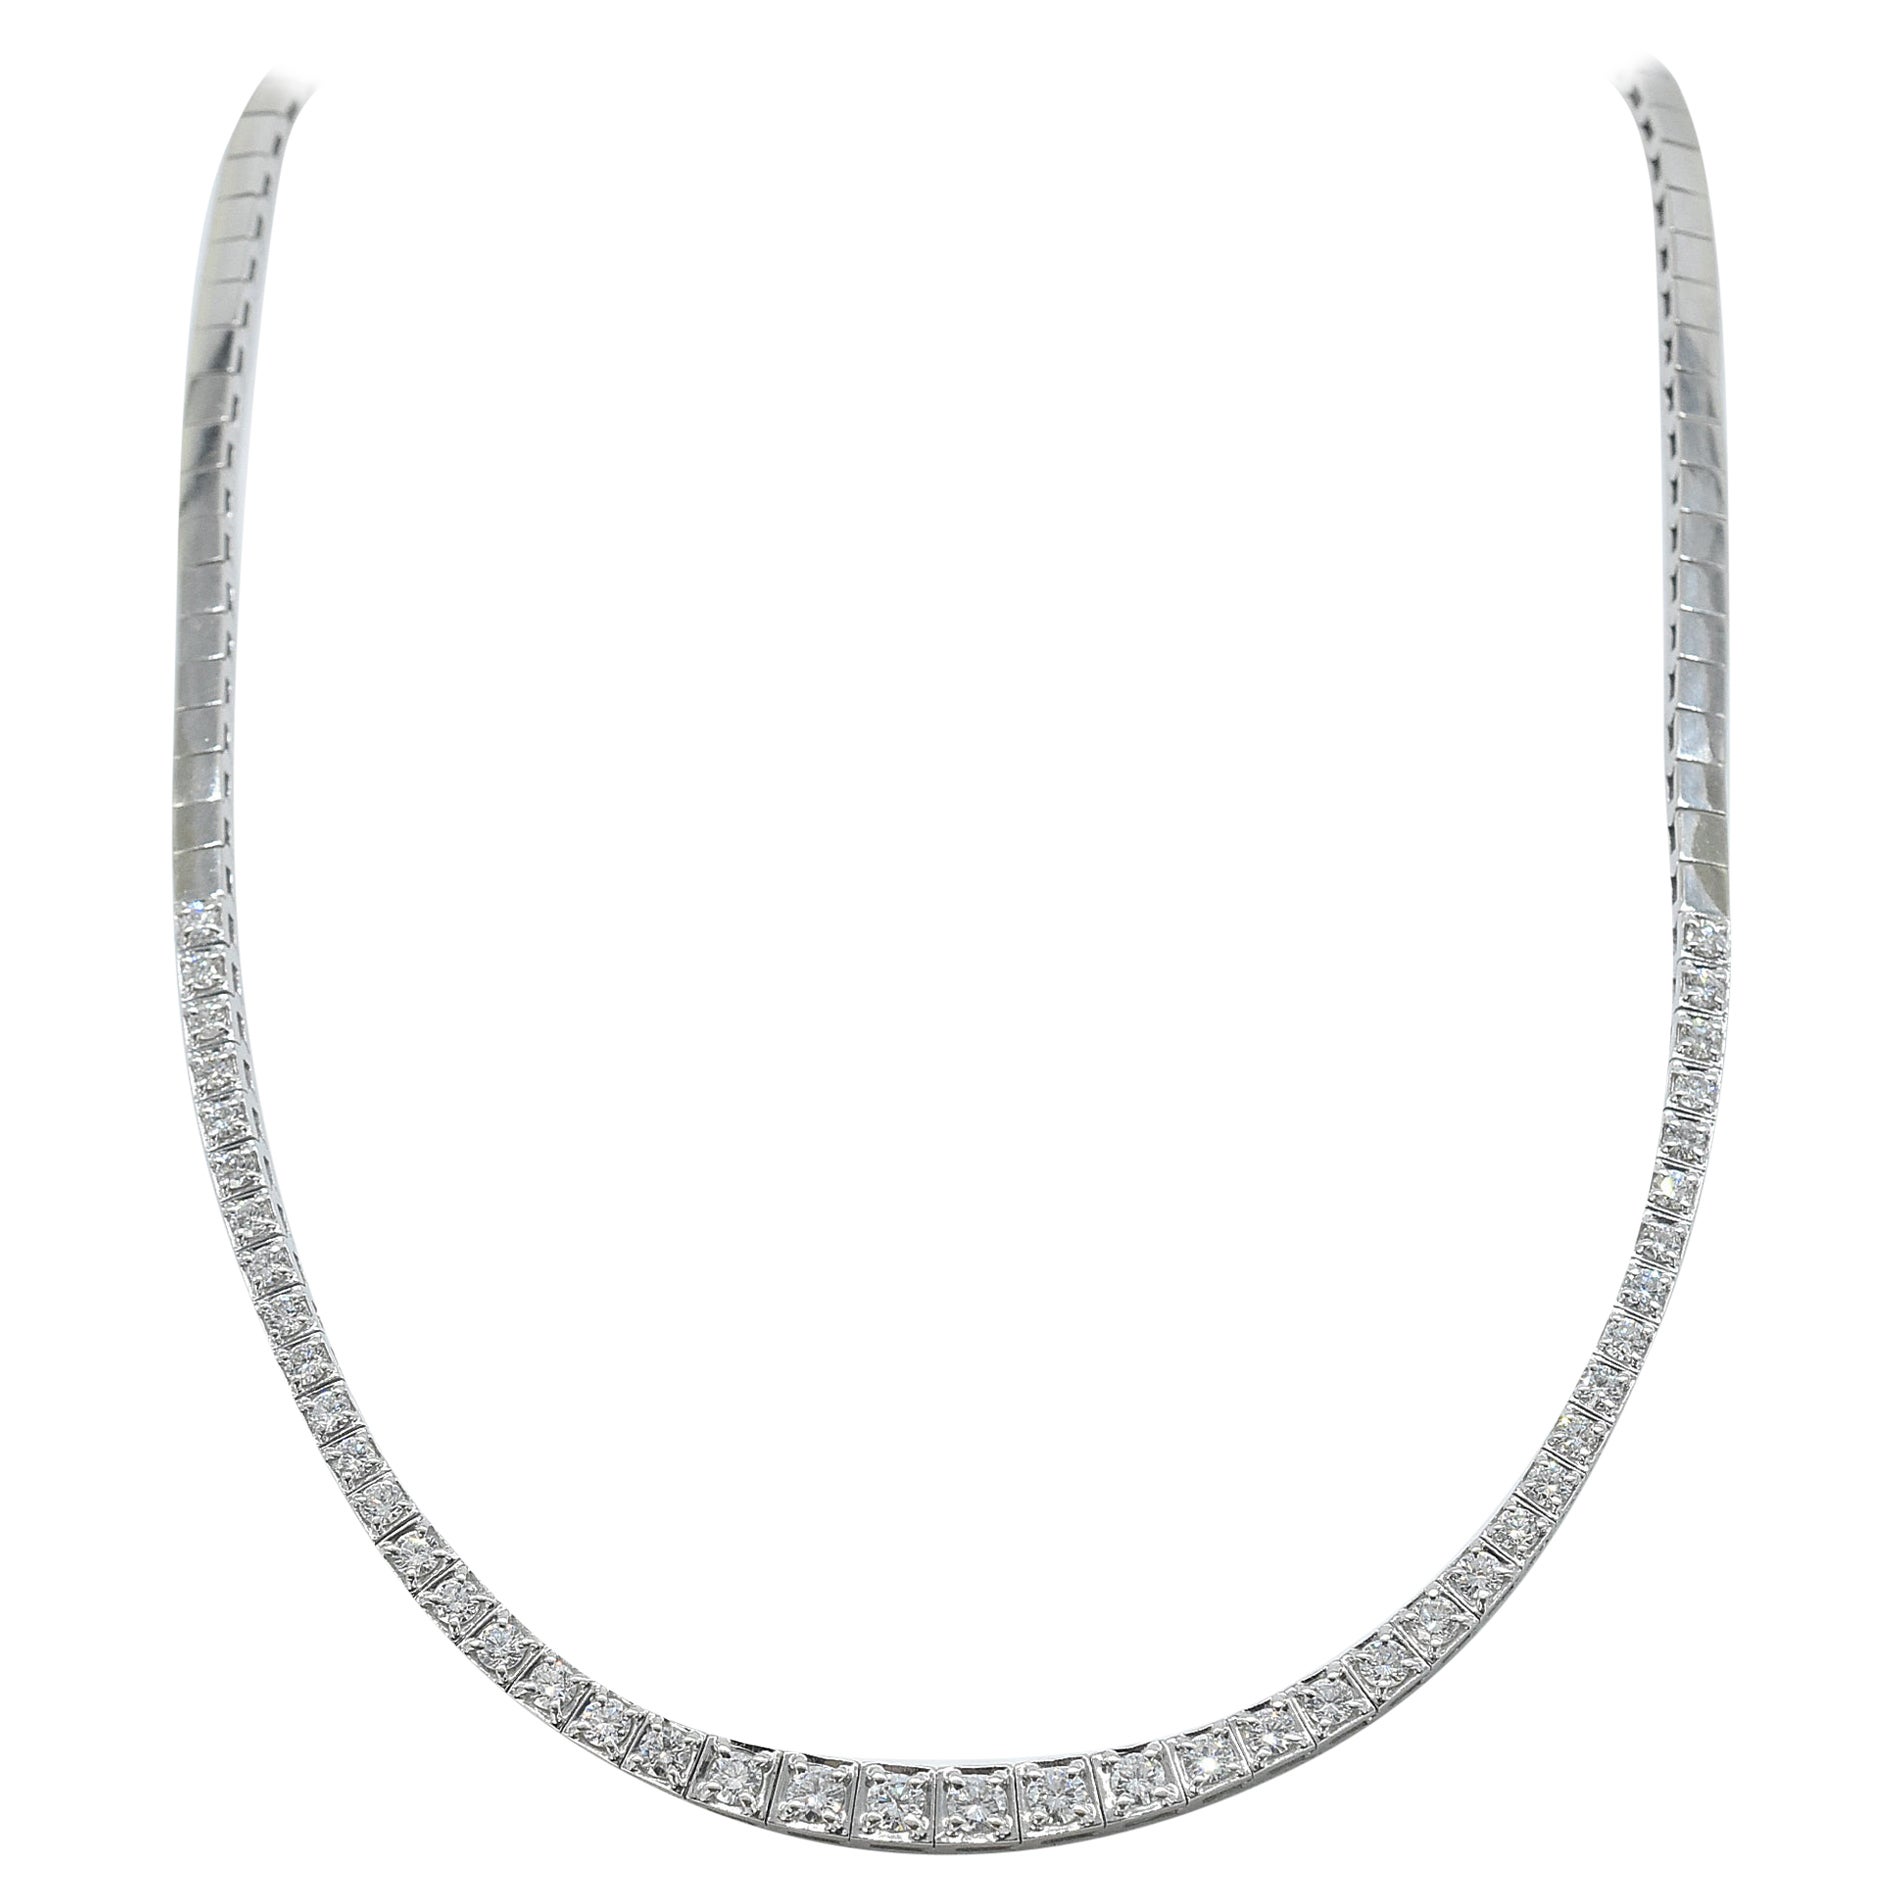 4.05cttw Diamond and White Gold Necklace